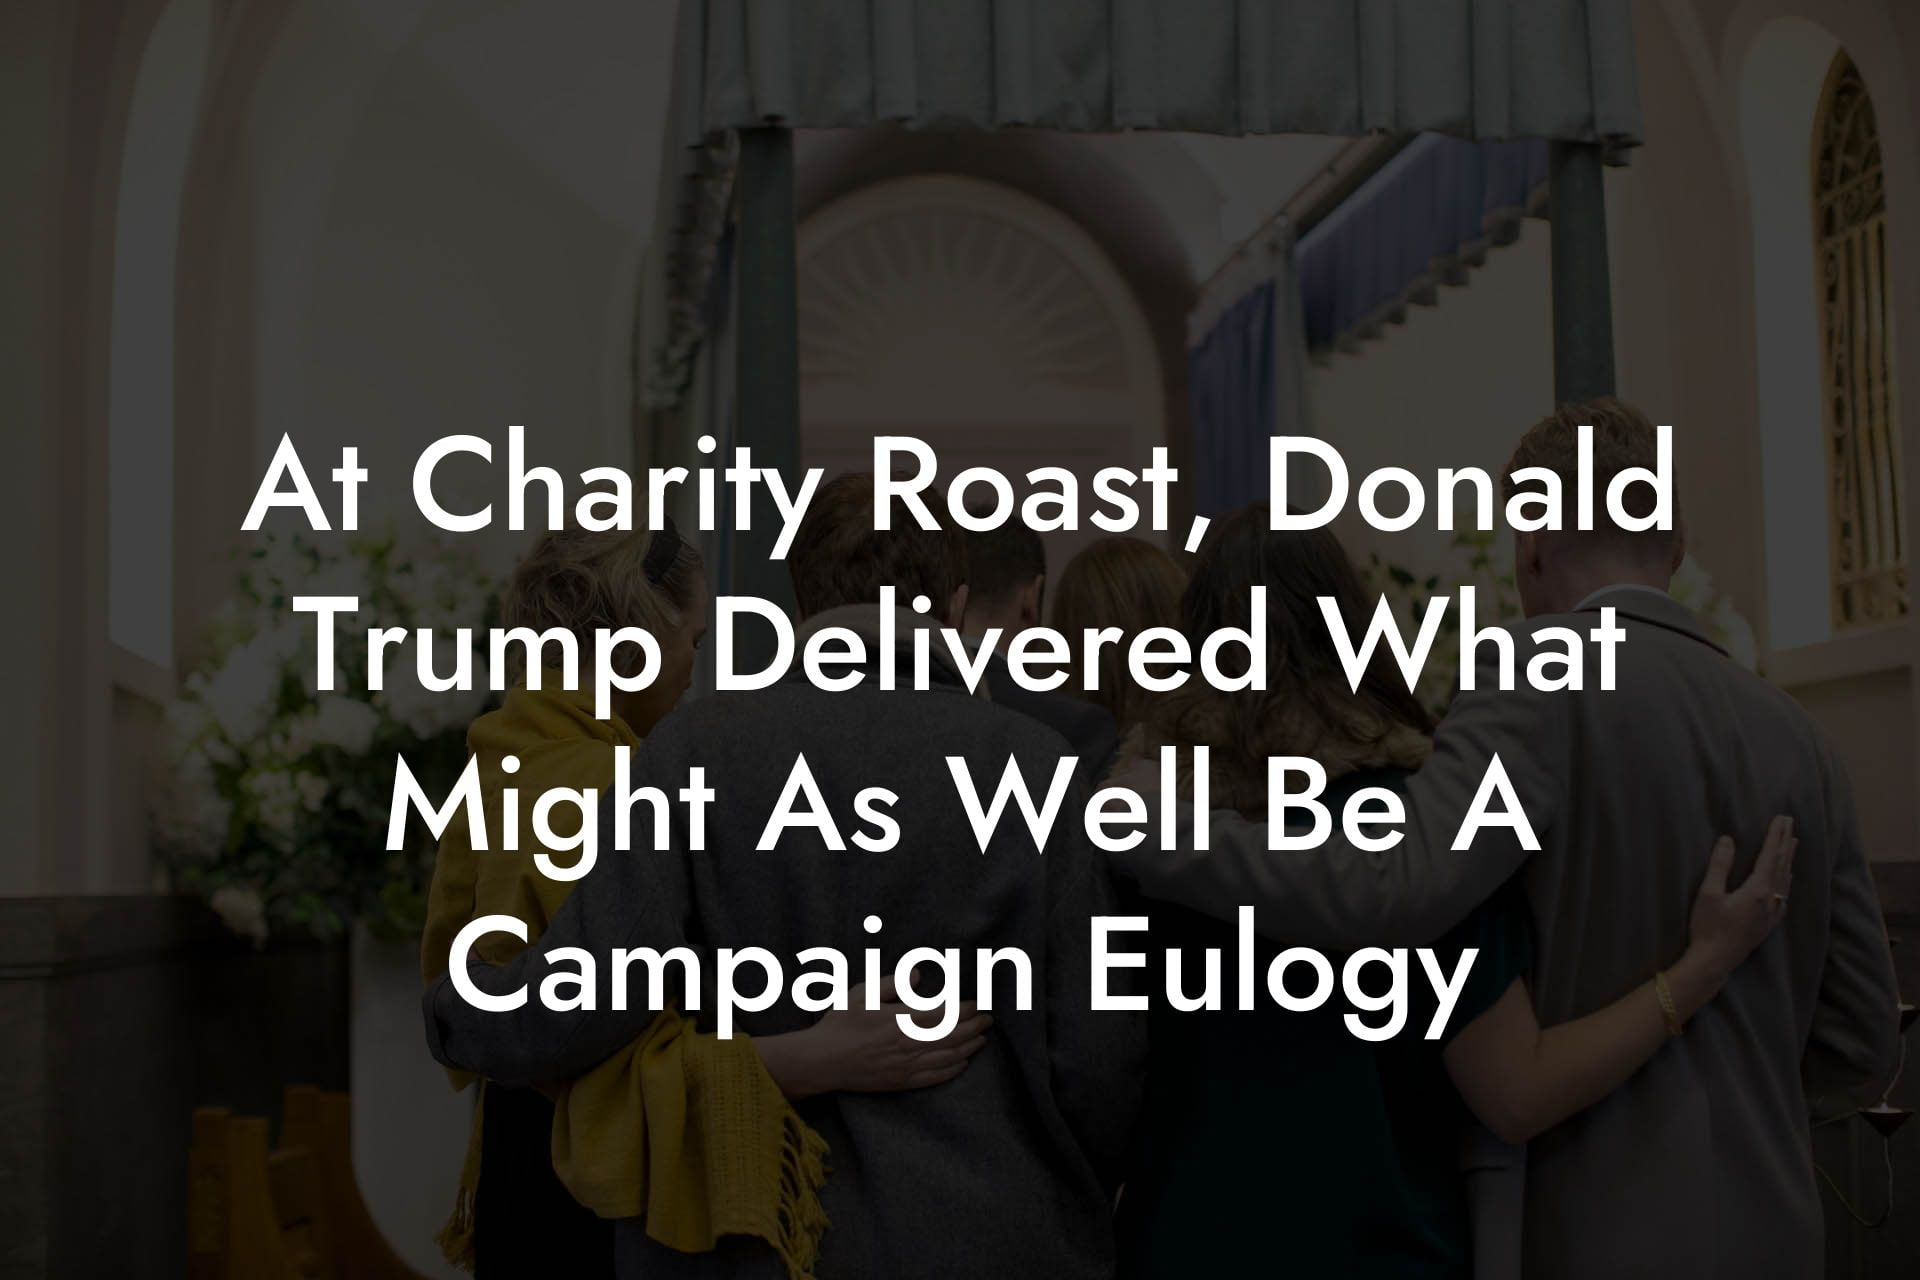 At Charity Roast, Donald Trump Delivered What Might As Well Be A Campaign Eulogy